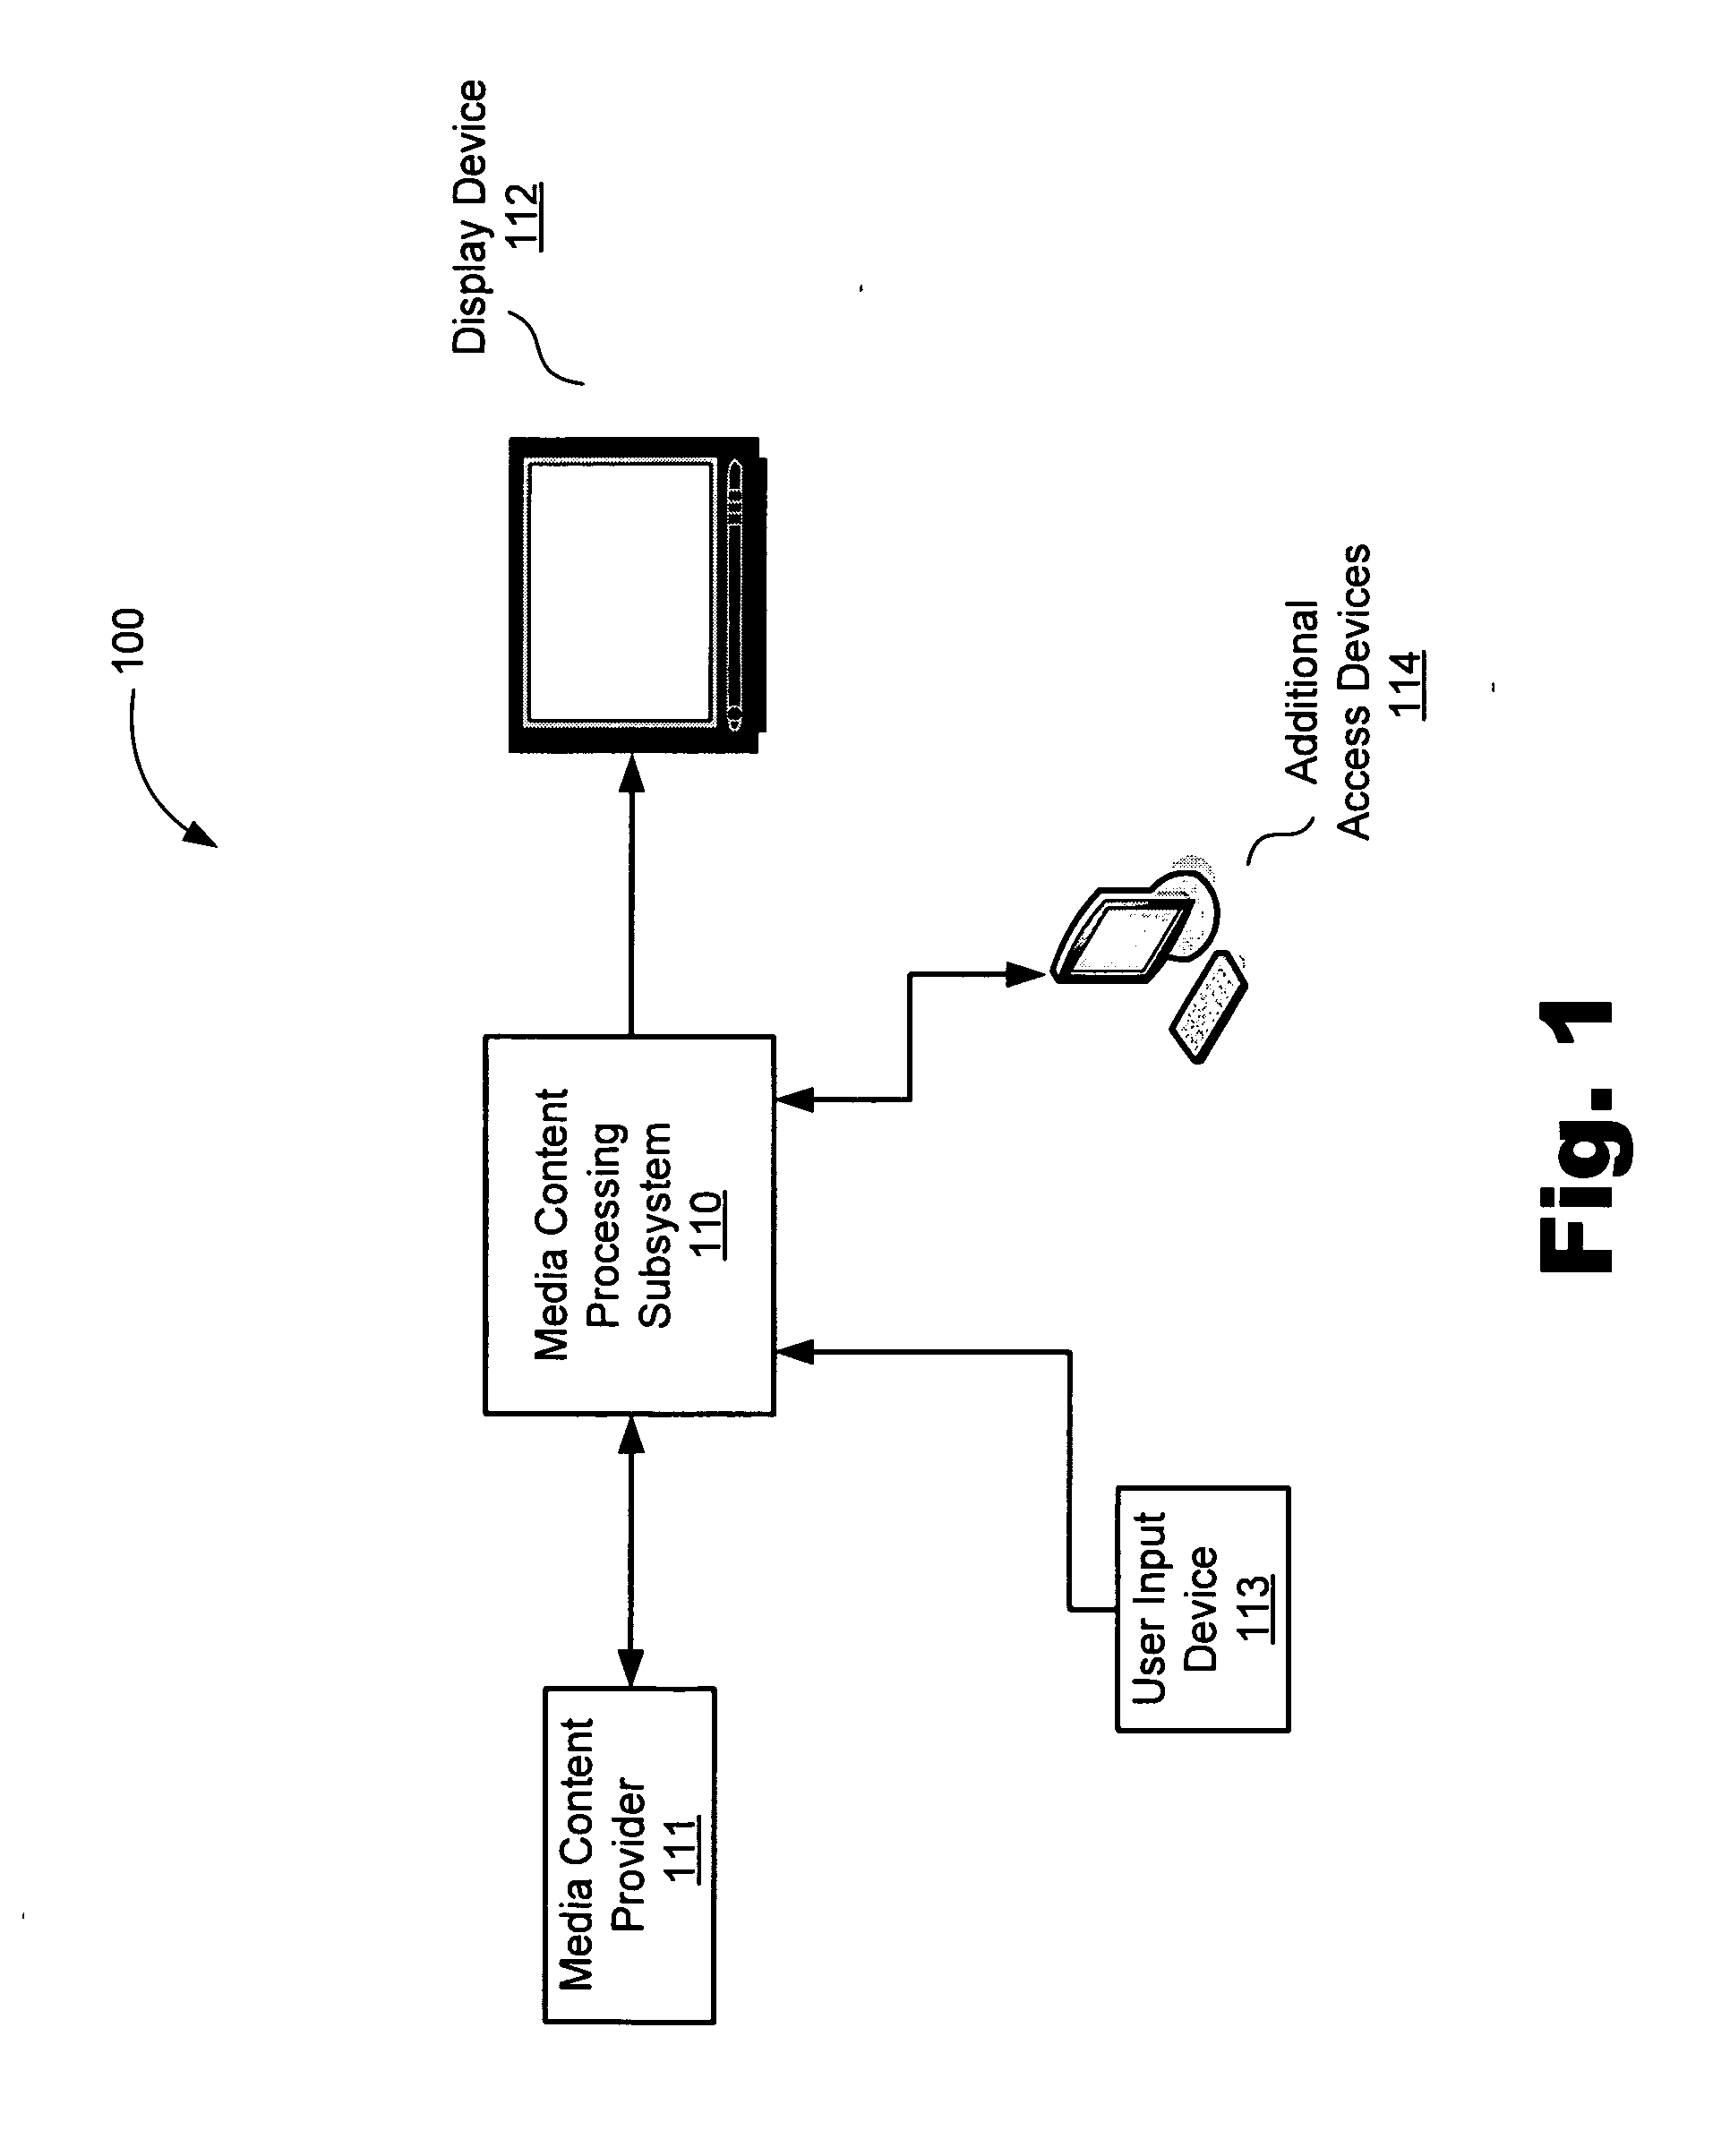 Interactive search graphical user interface systems and methods